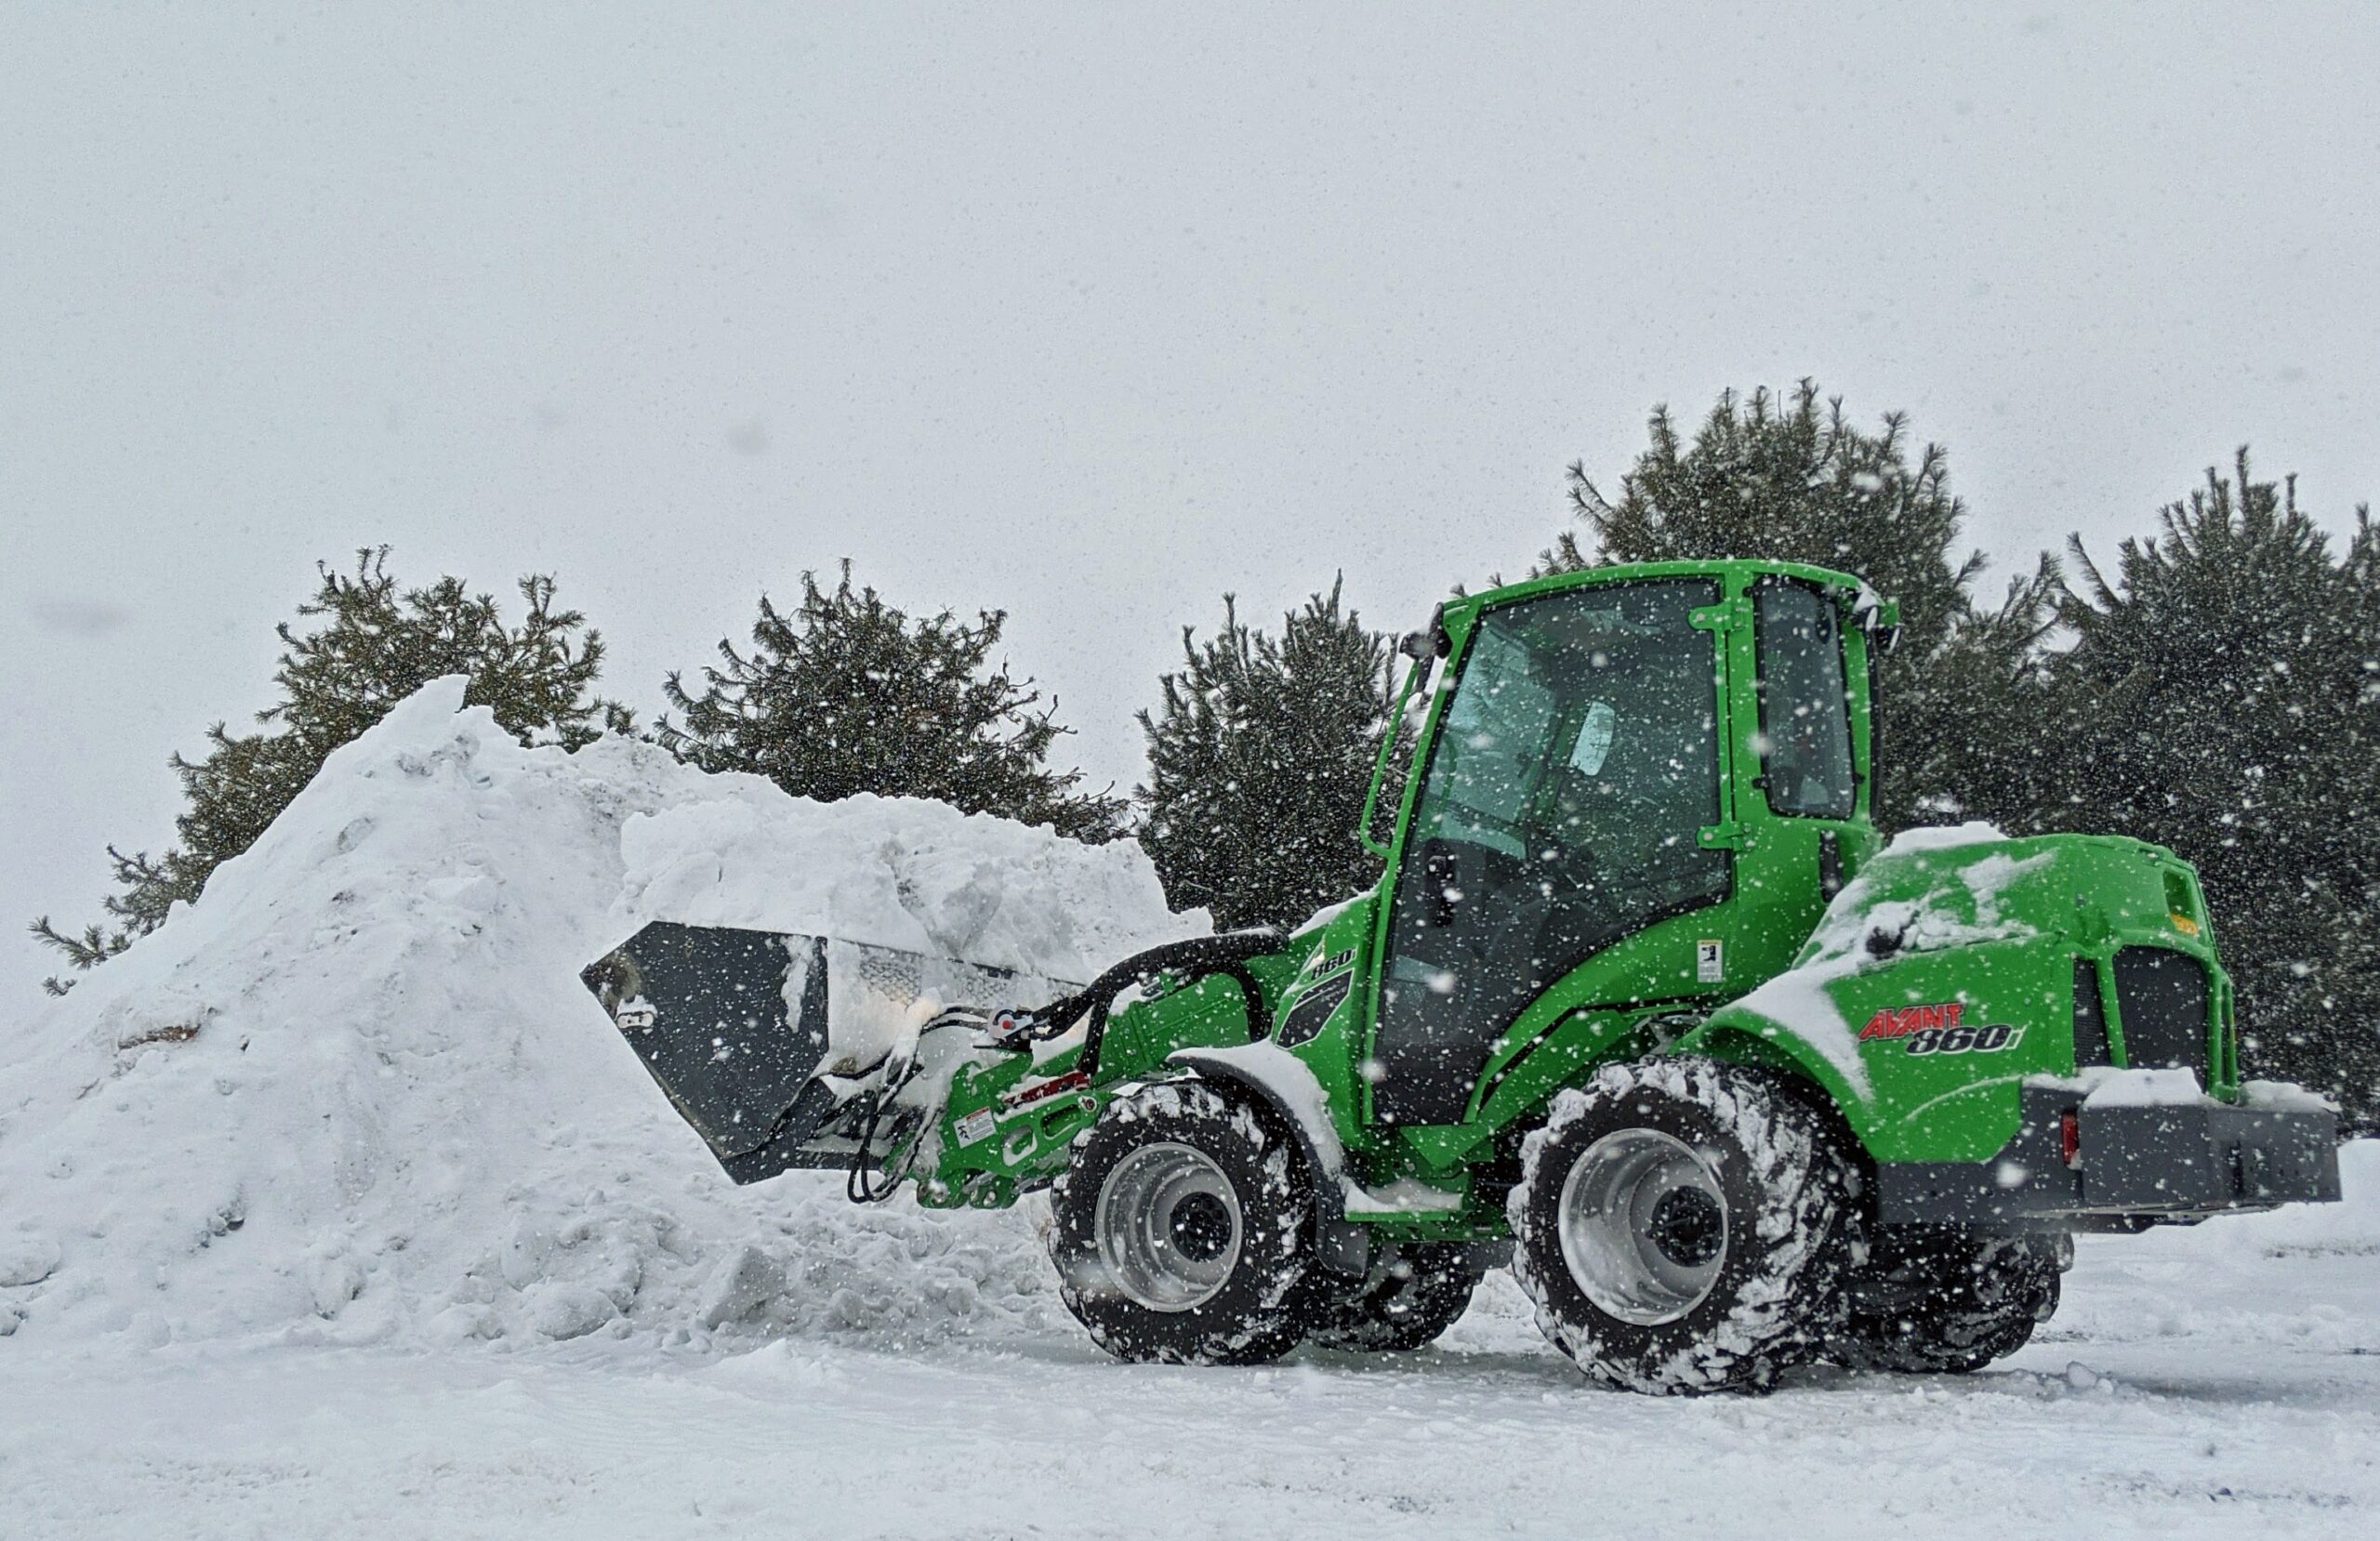 A green snowplow pushes a bunch of snow into a large pile. Even the snowplow business has found a way not to be boring.